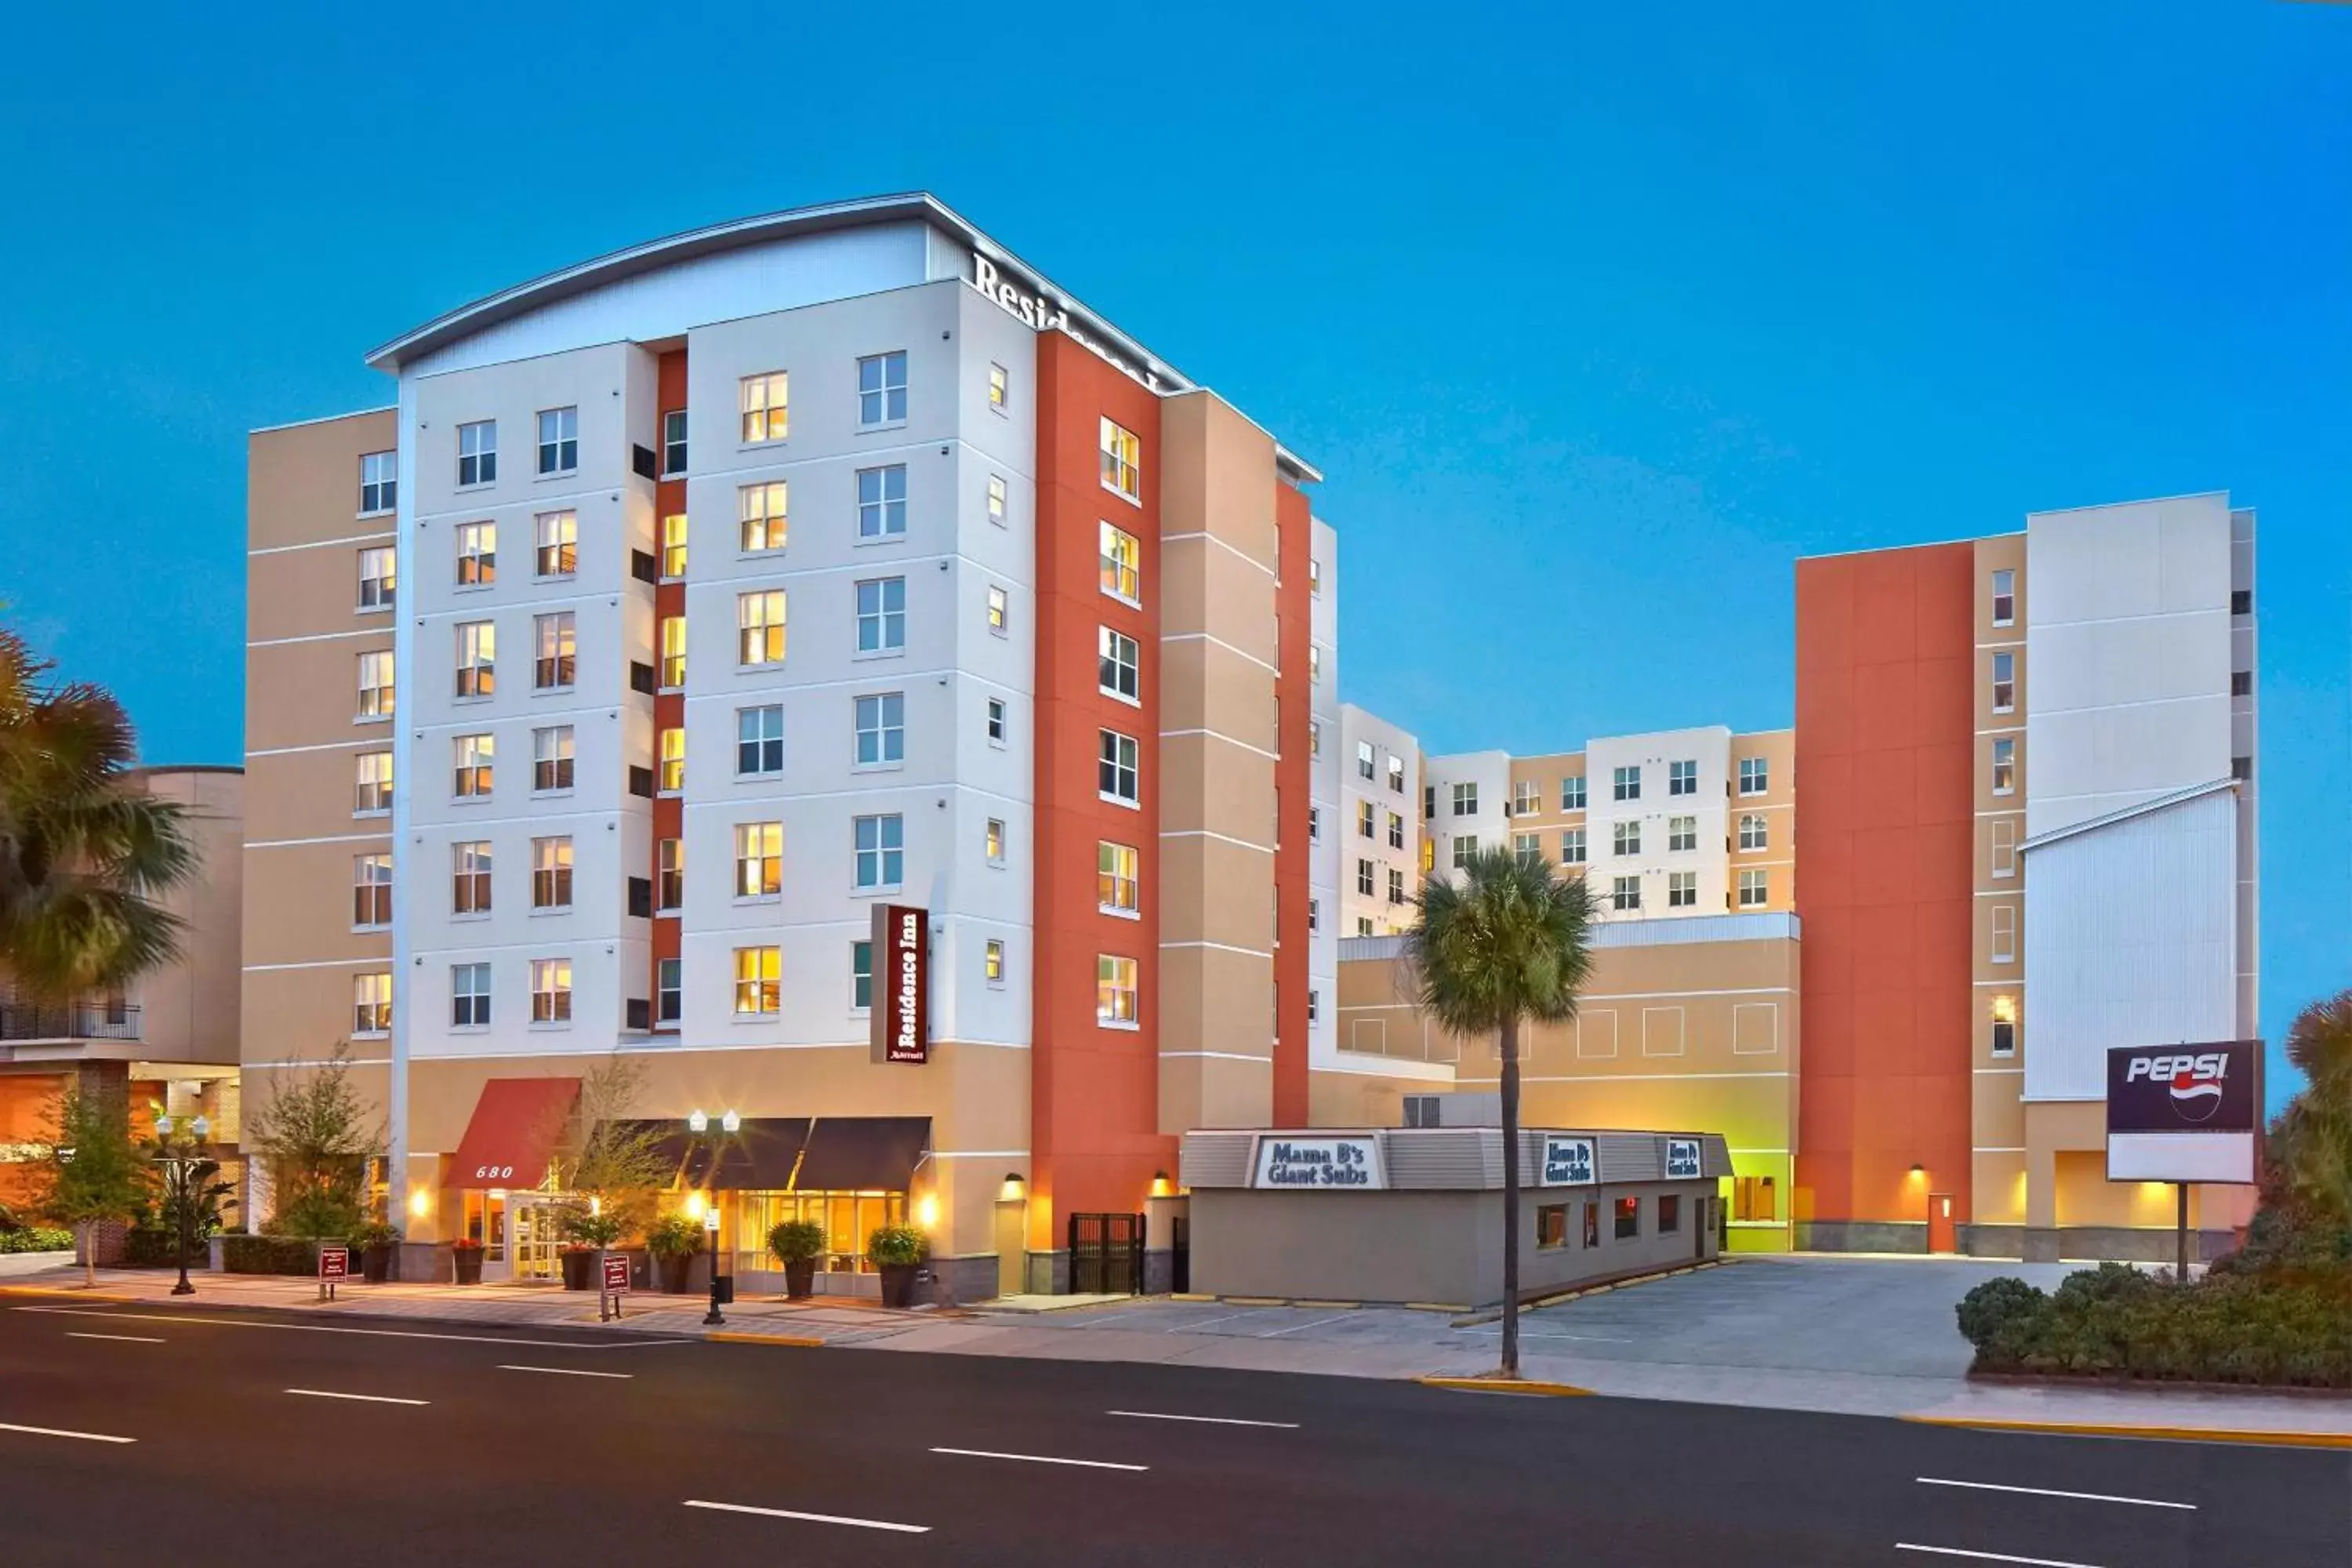 Property Building in Residence Inn by Marriott Orlando Downtown